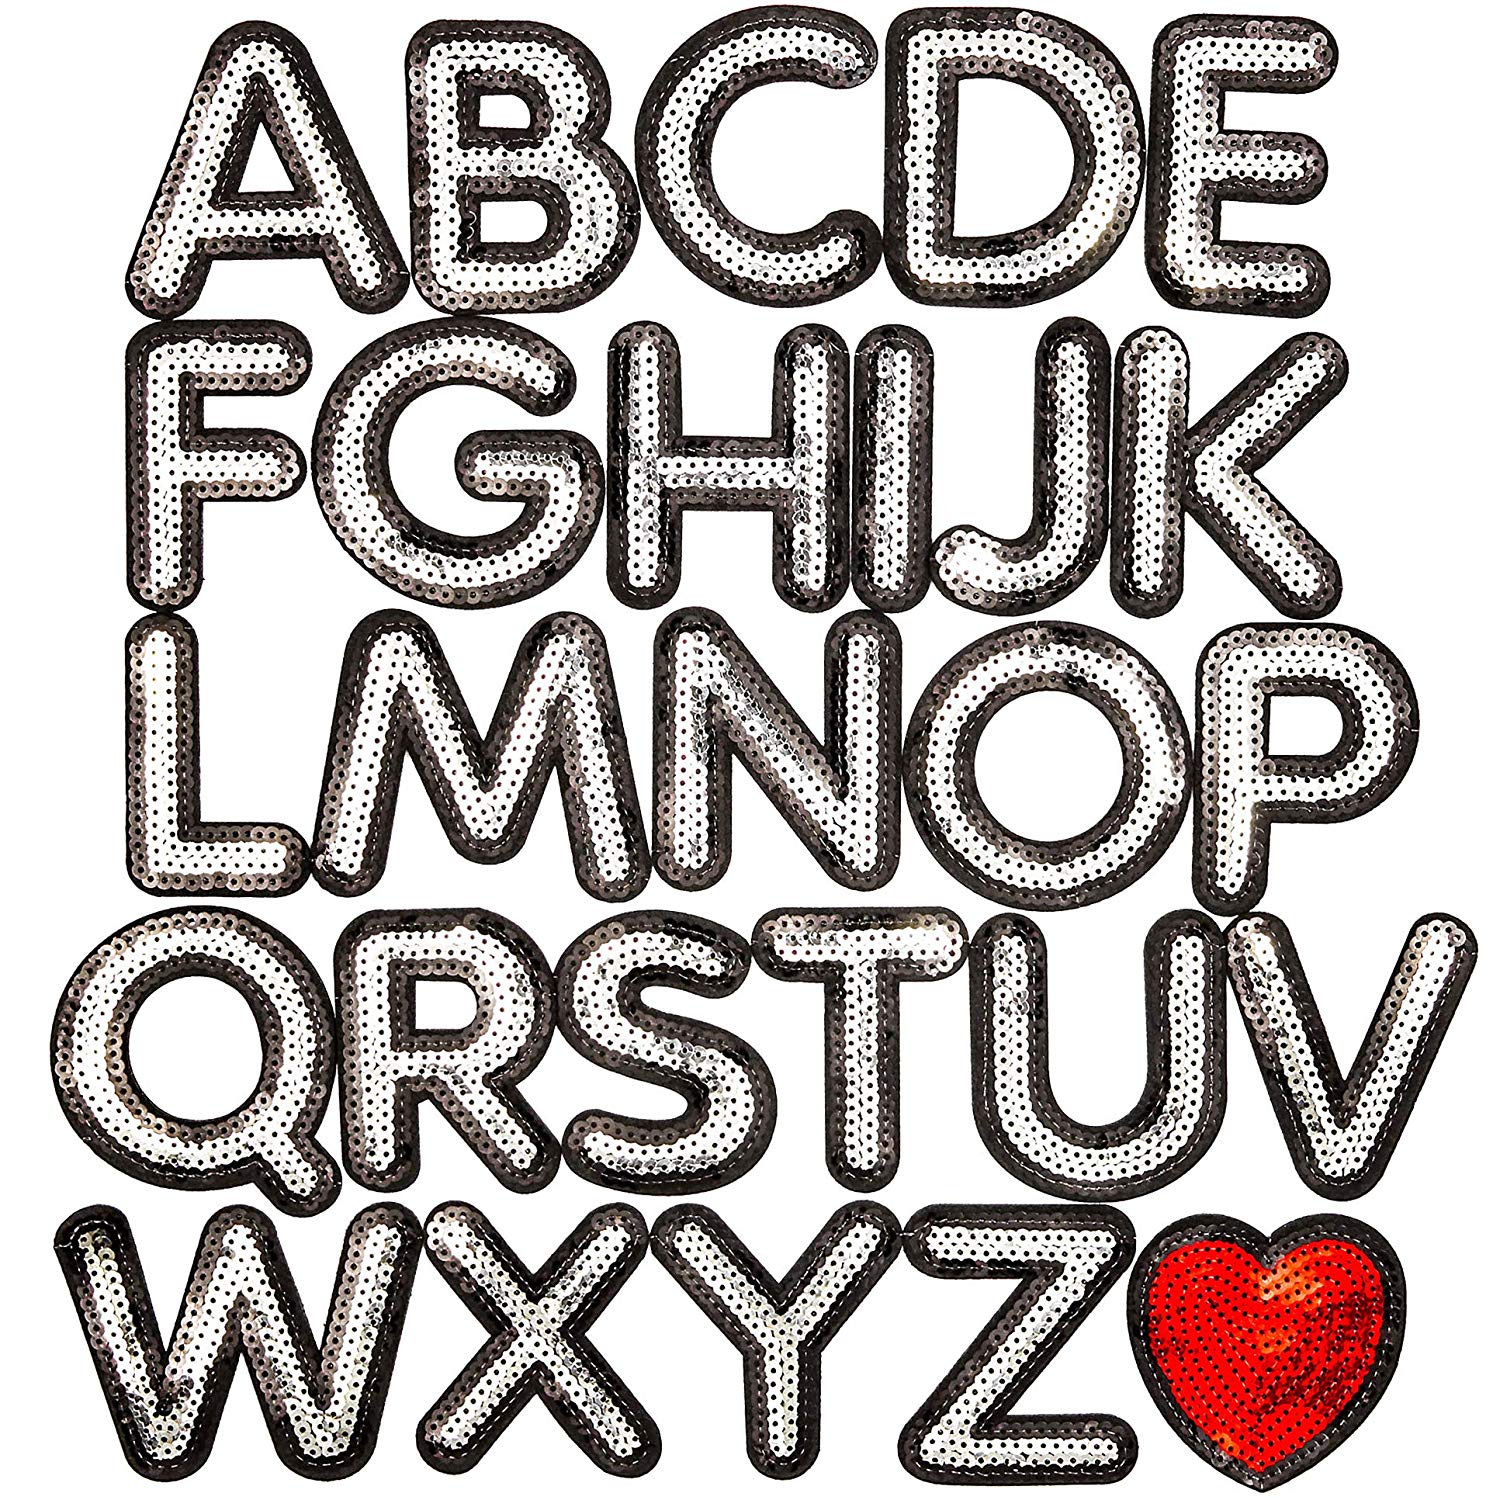 Iron on Letters for Clothing, A-Z Sequin Embroidery Patches for Jackets & Denim (3.7 x 3 in, 27 Pieces)